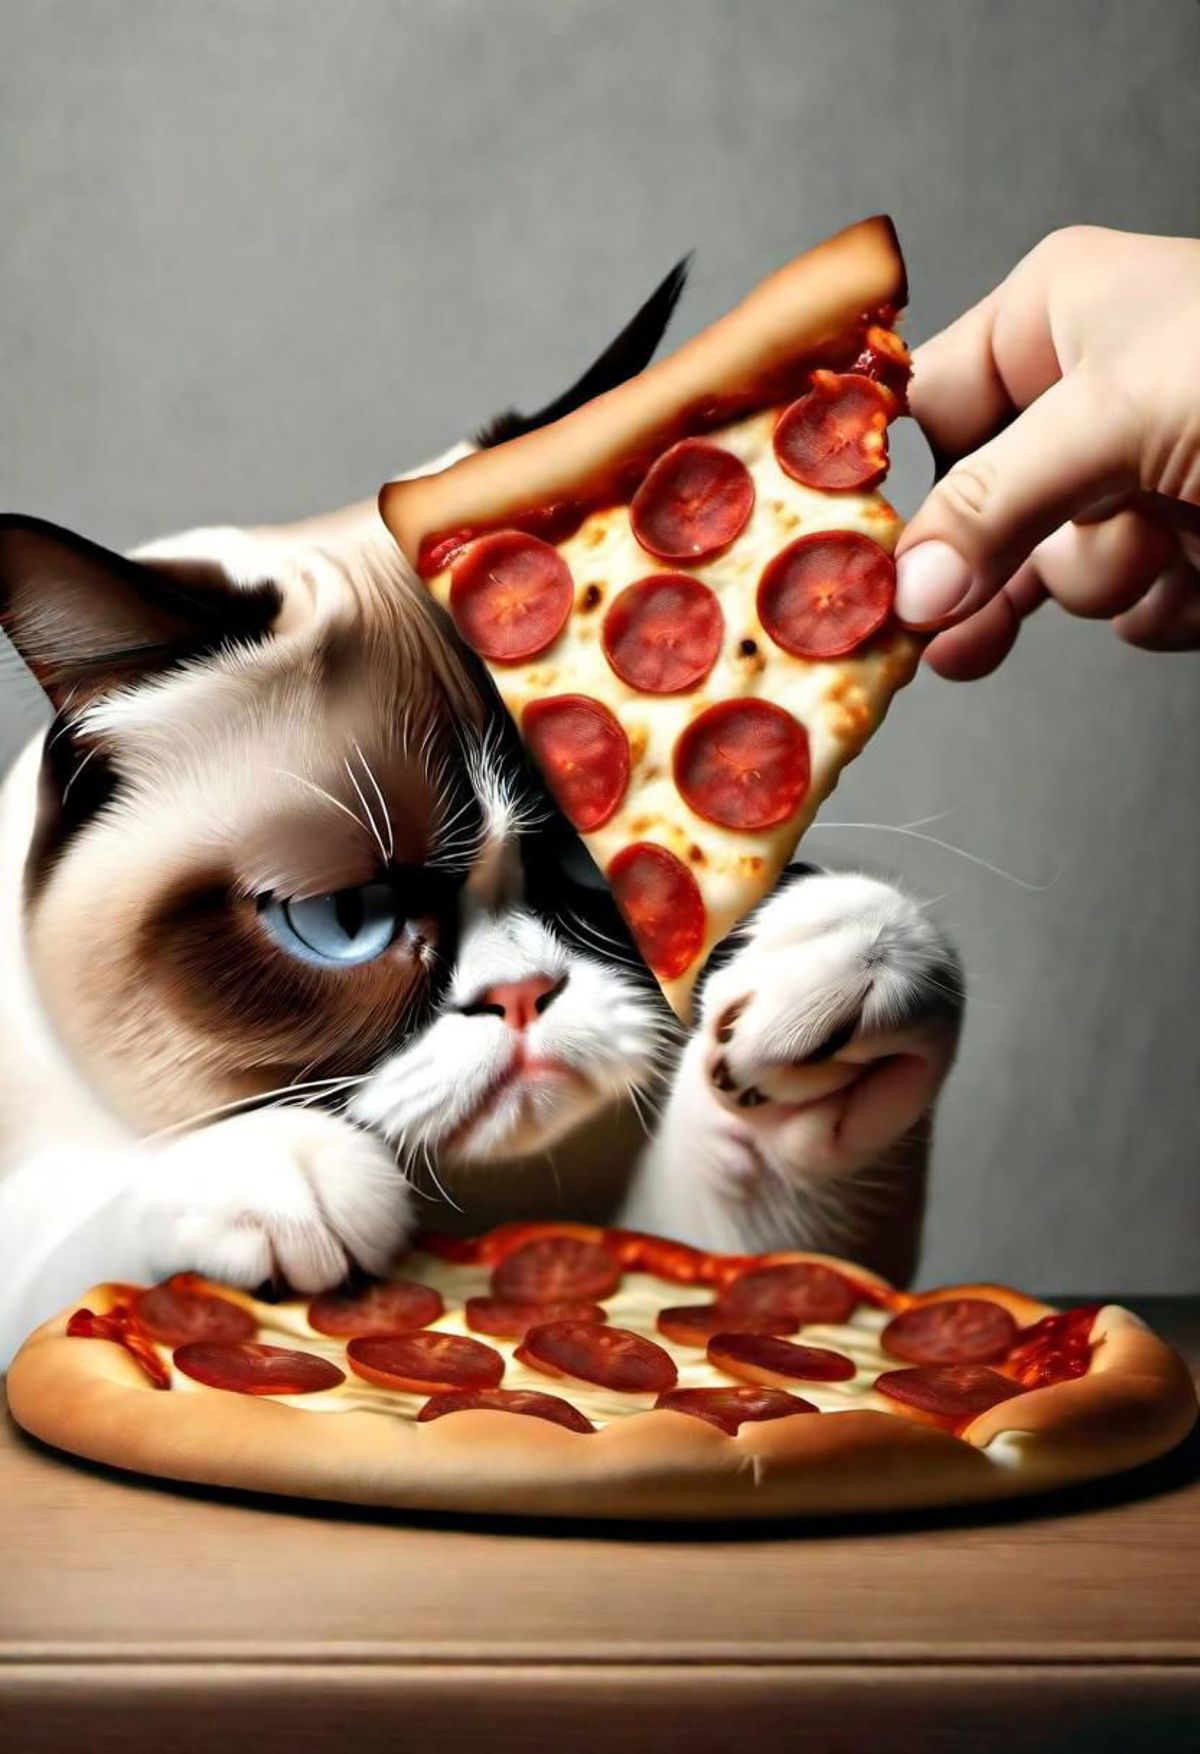 A cat and a slice of pizza - A humorous image of a cat and a slice of pizza.